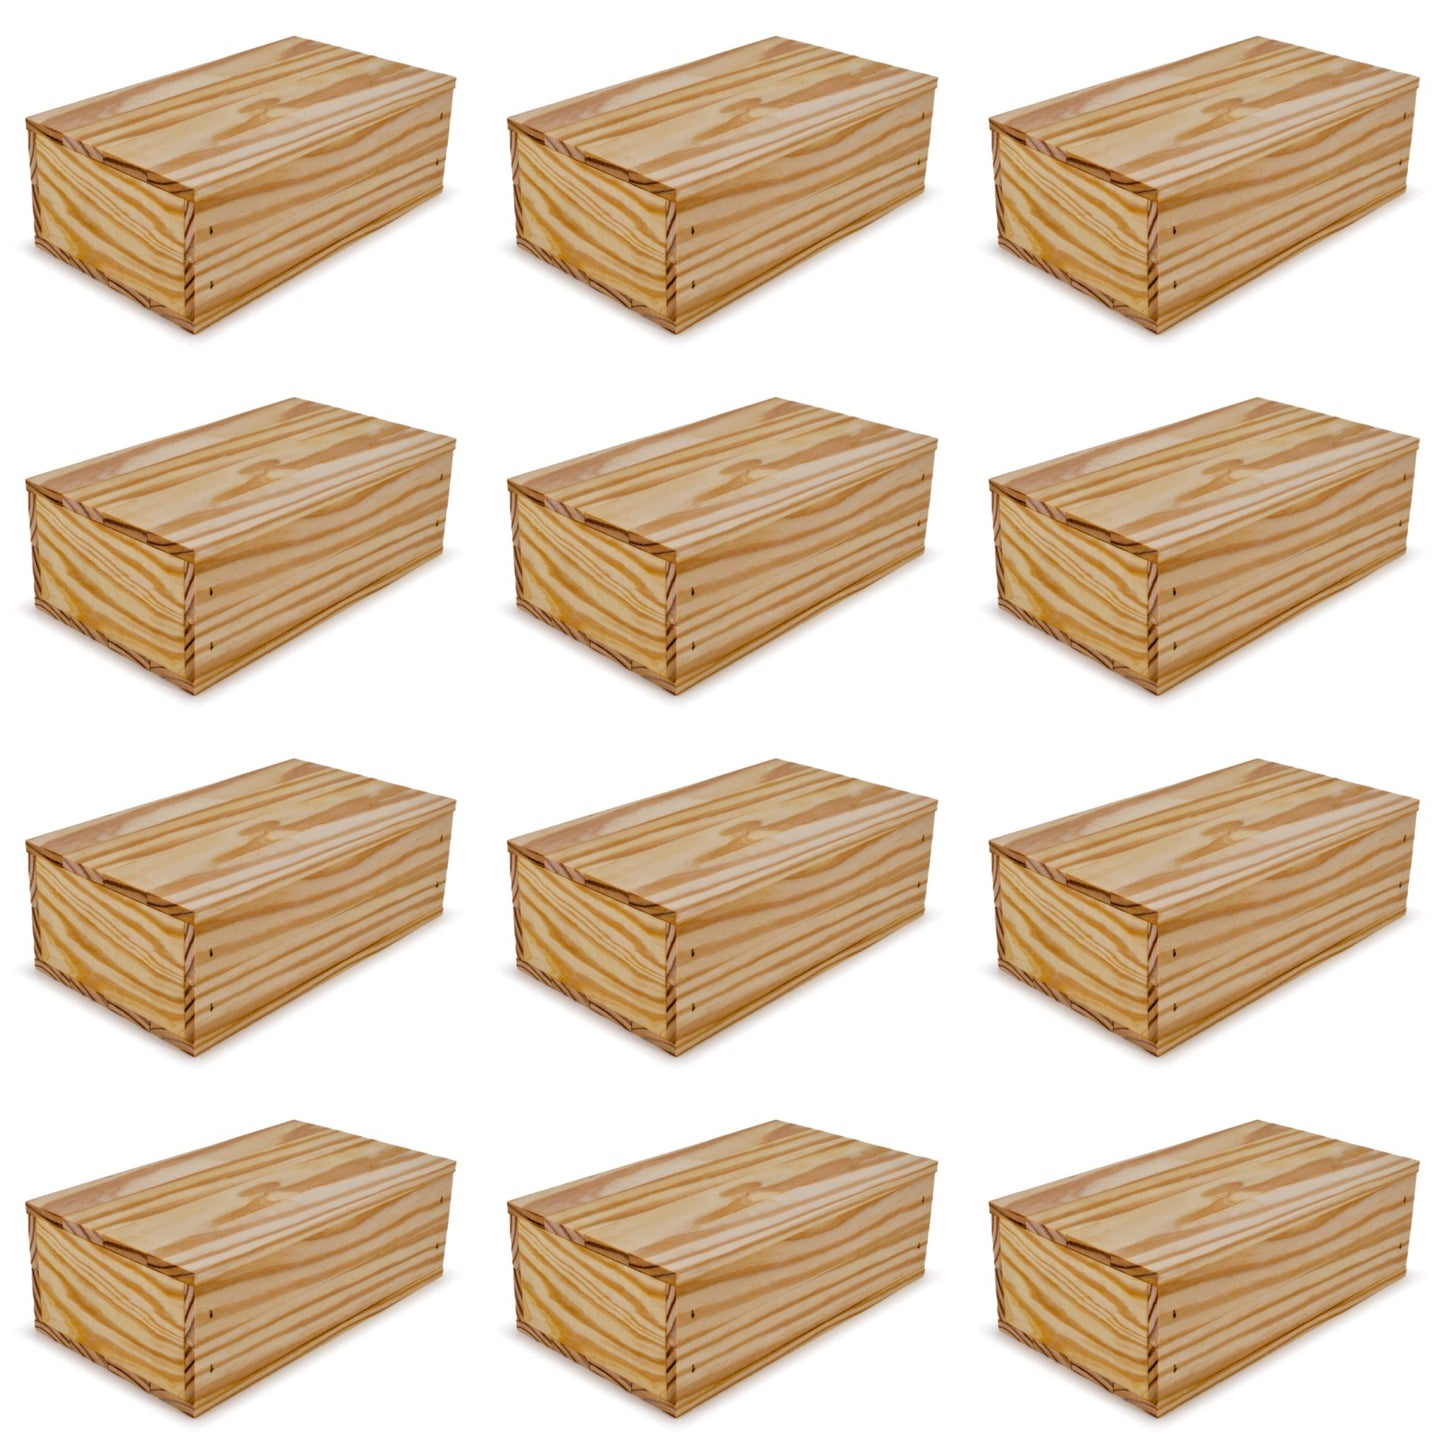 12 Small wooden crates with lid 11x6.25x3.5